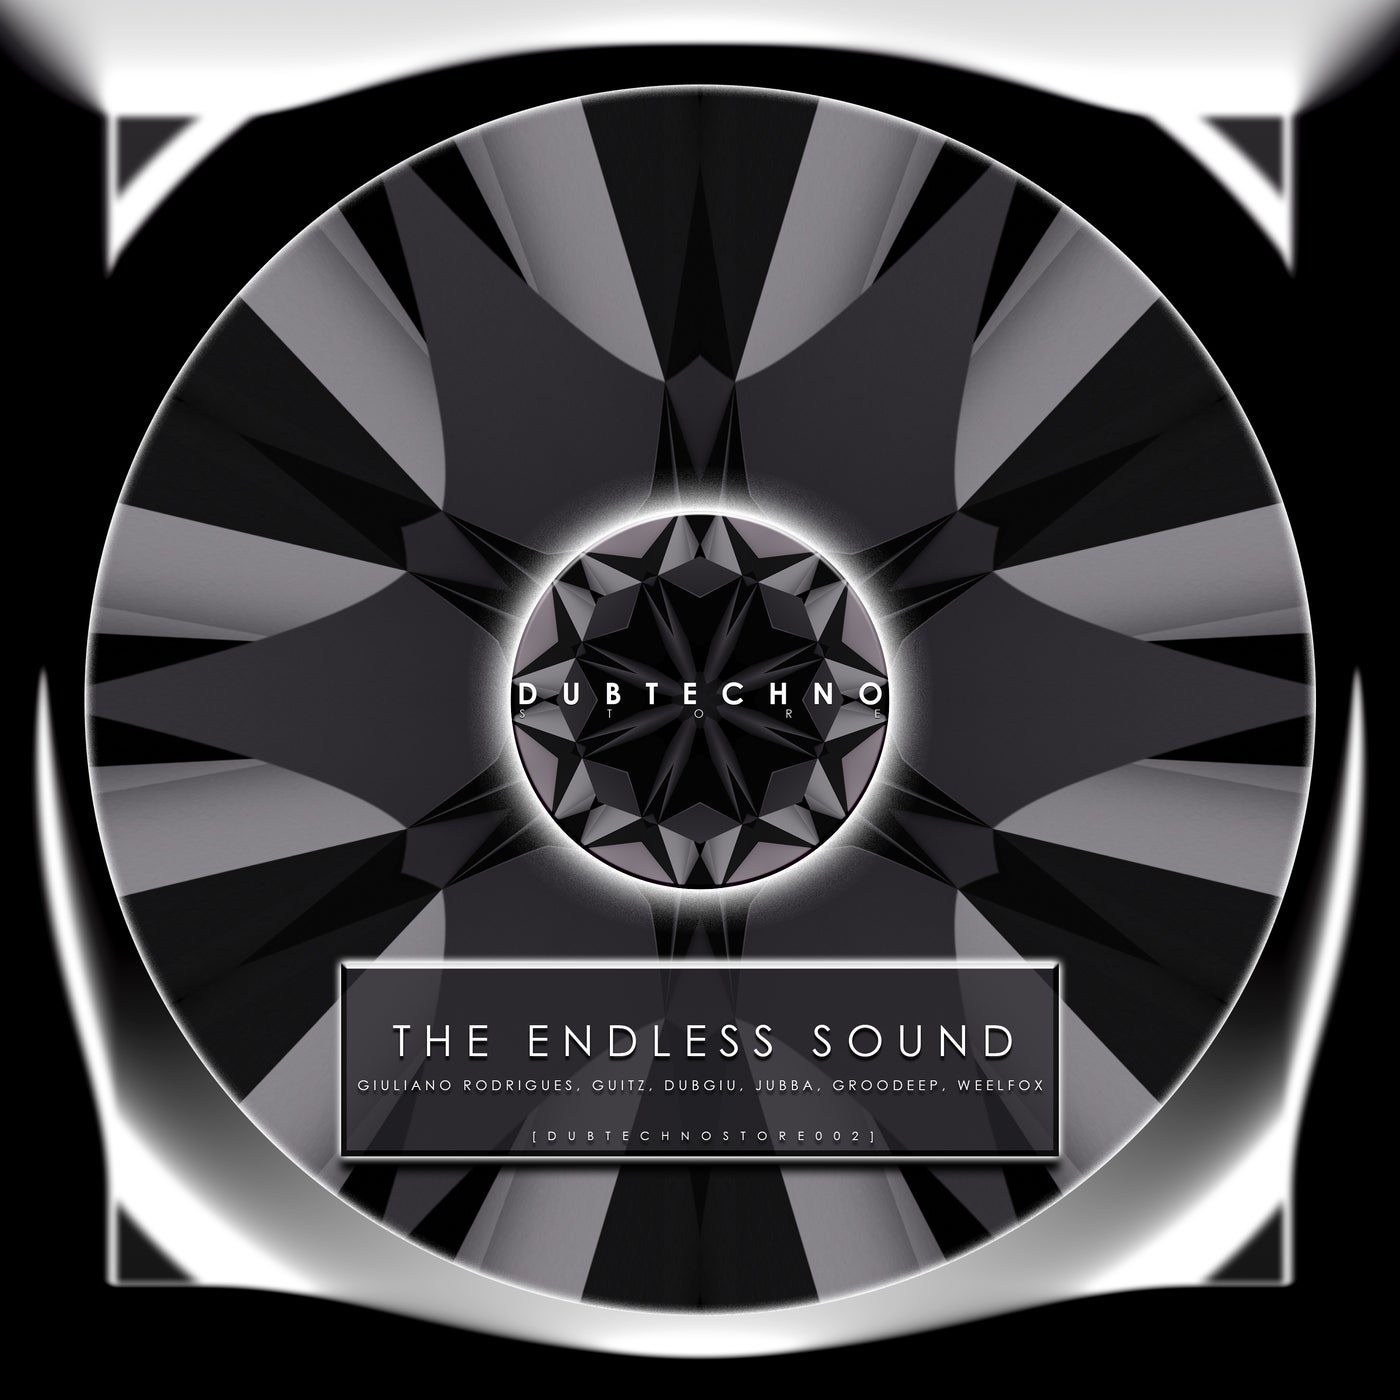 The Endless Sound